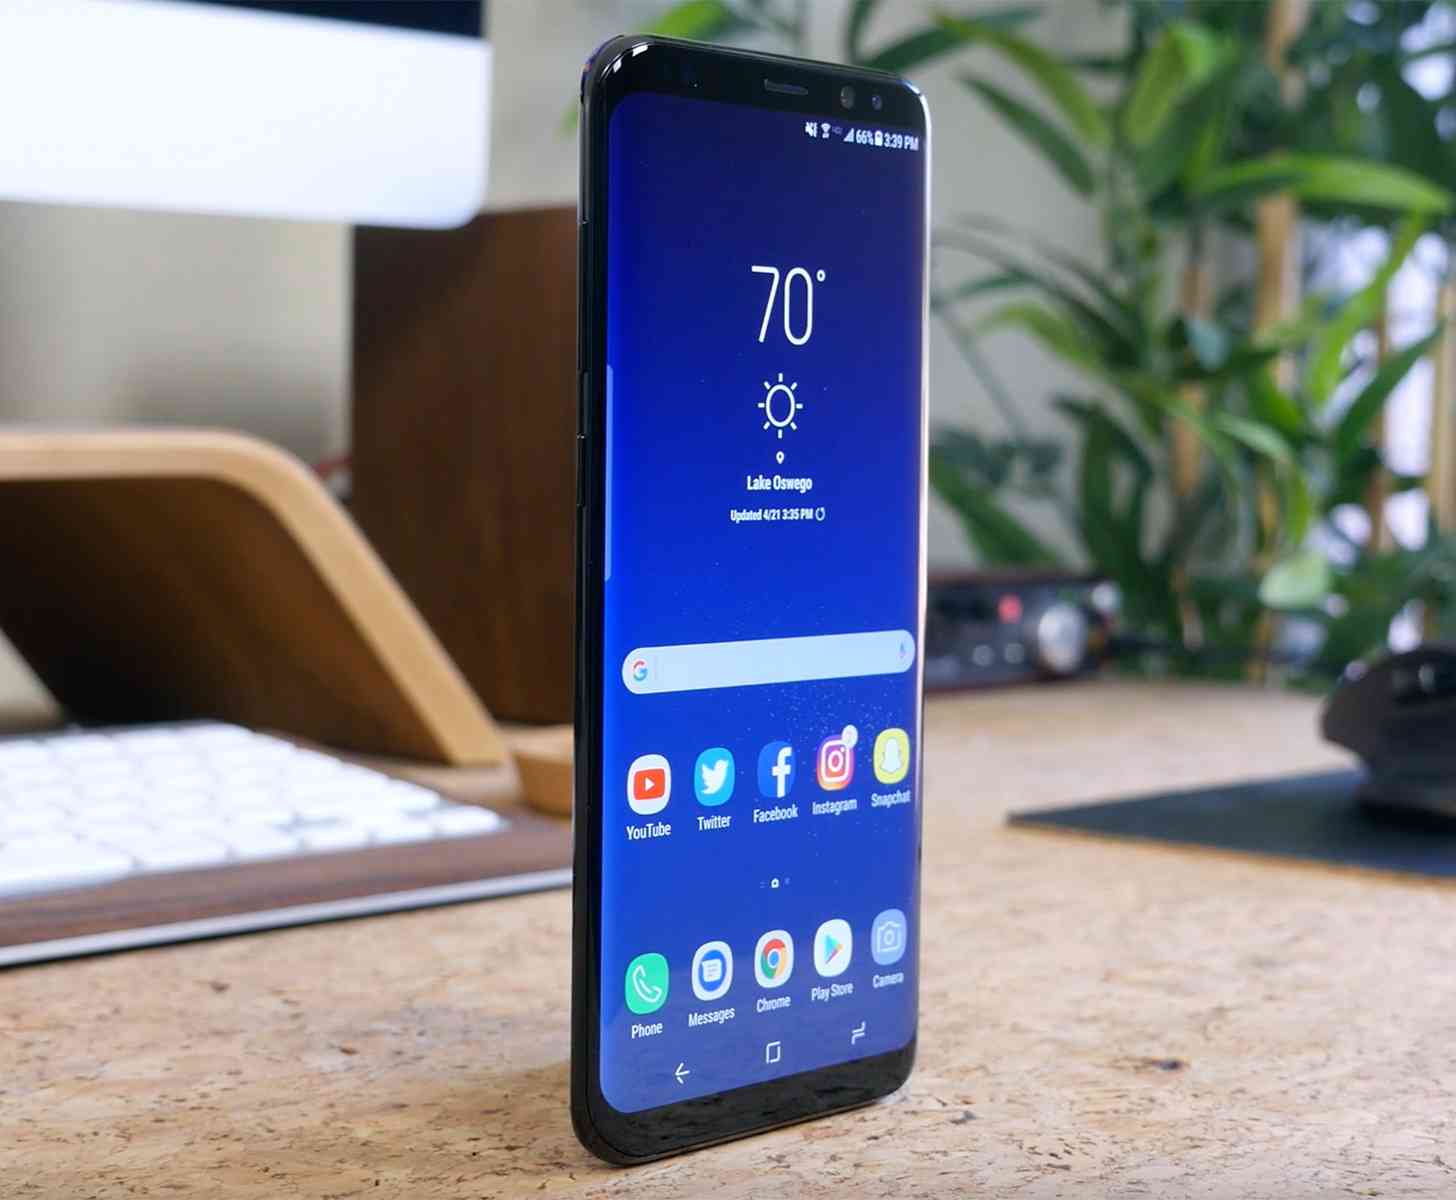 Samsung Galaxy S8+ hands-on video review